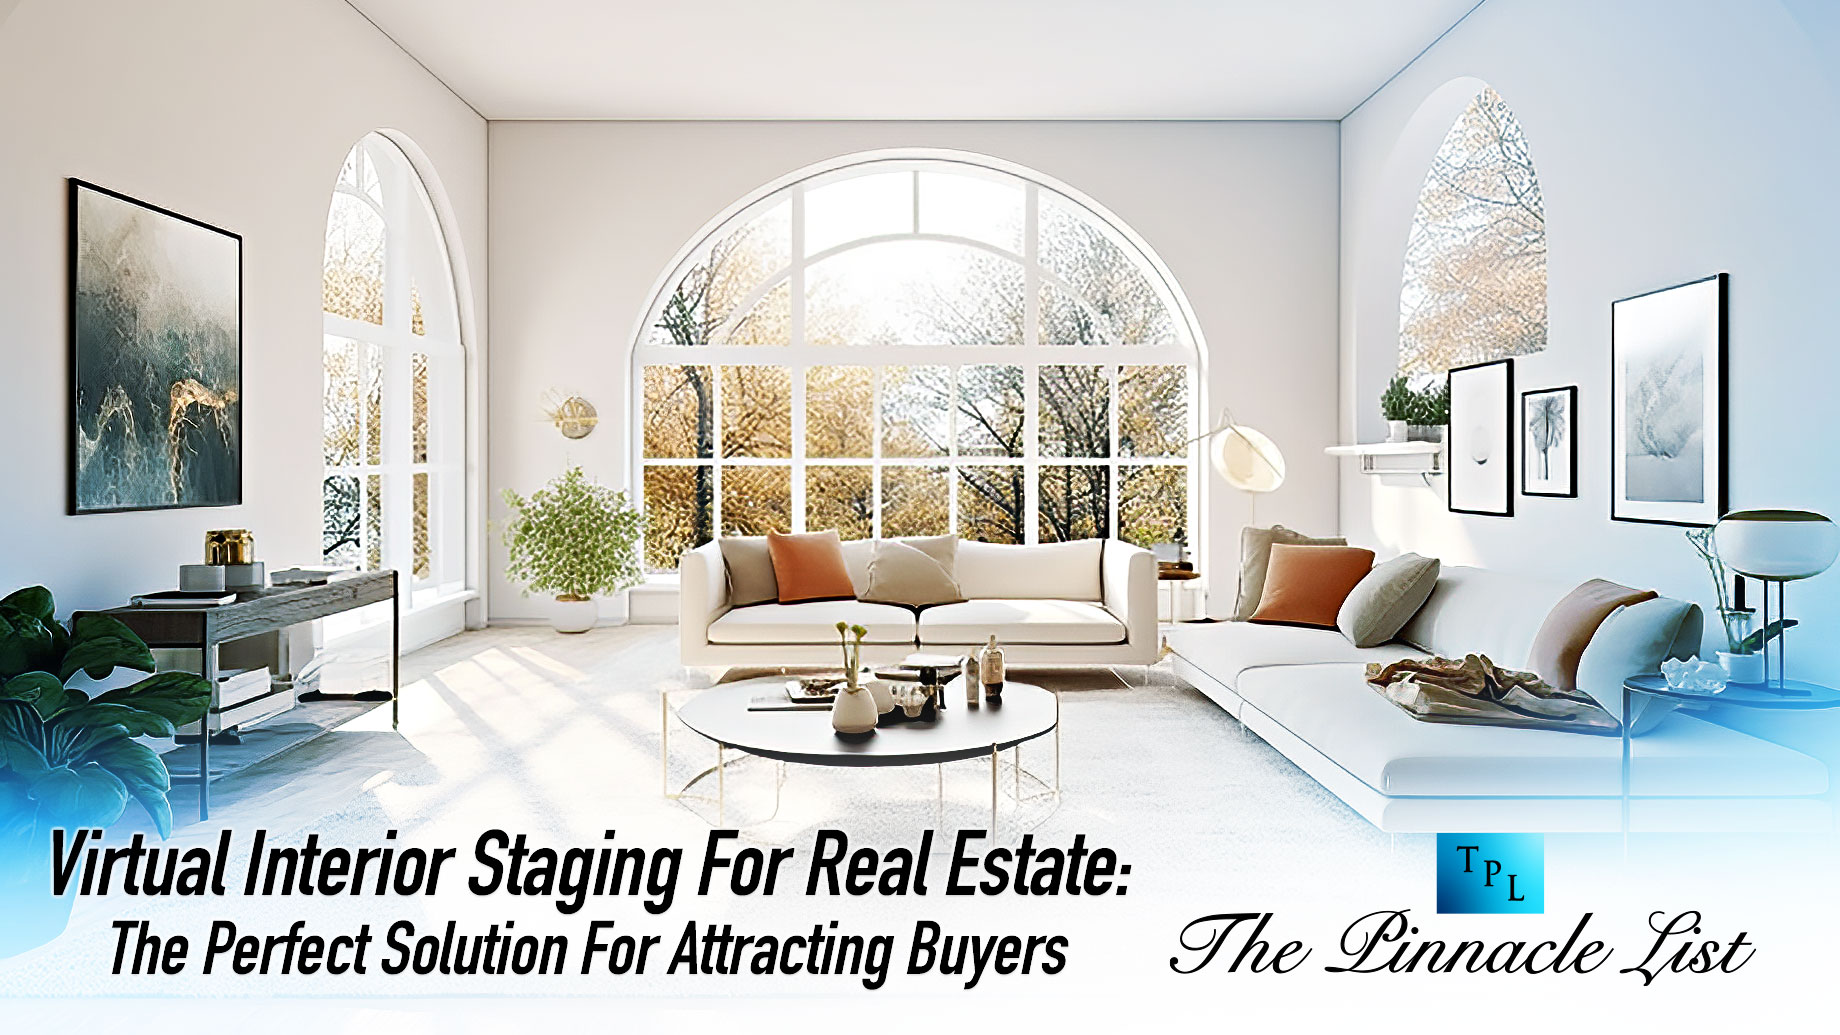 Virtual Interior Staging For Real Estate: The Perfect Solution For Attracting Buyers